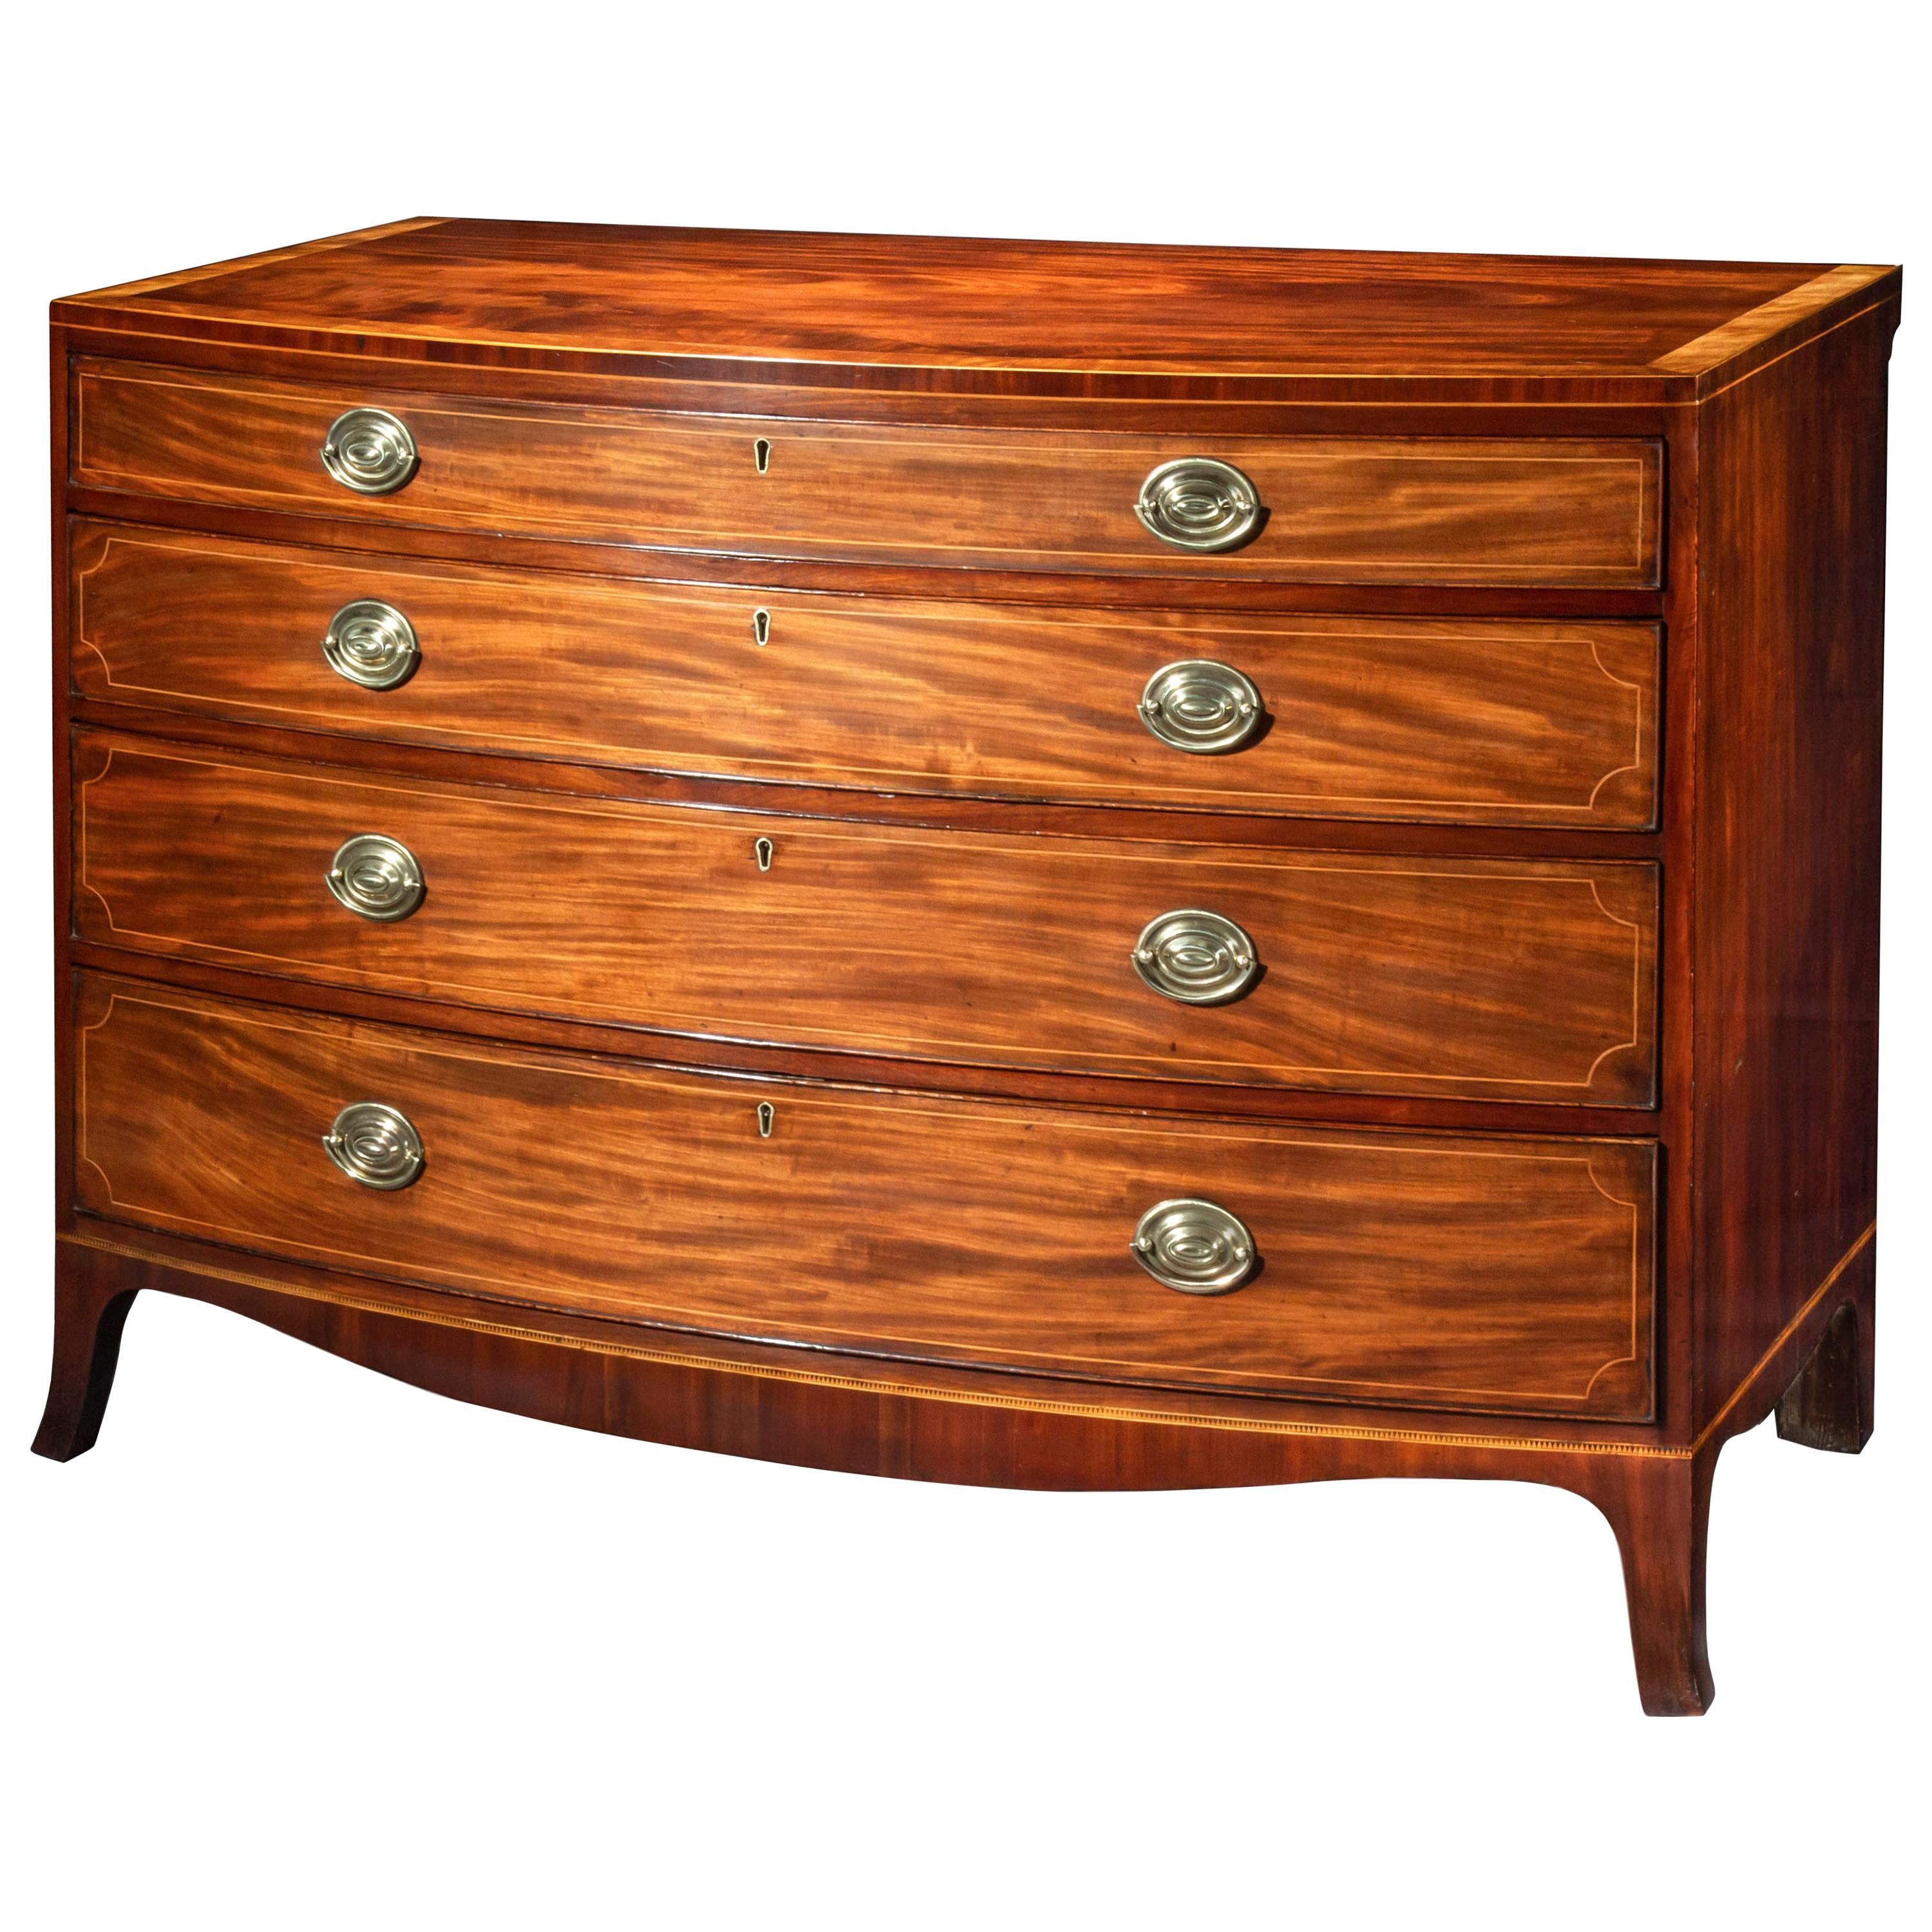 Antique Regency Chest of Drawers, circa 1800